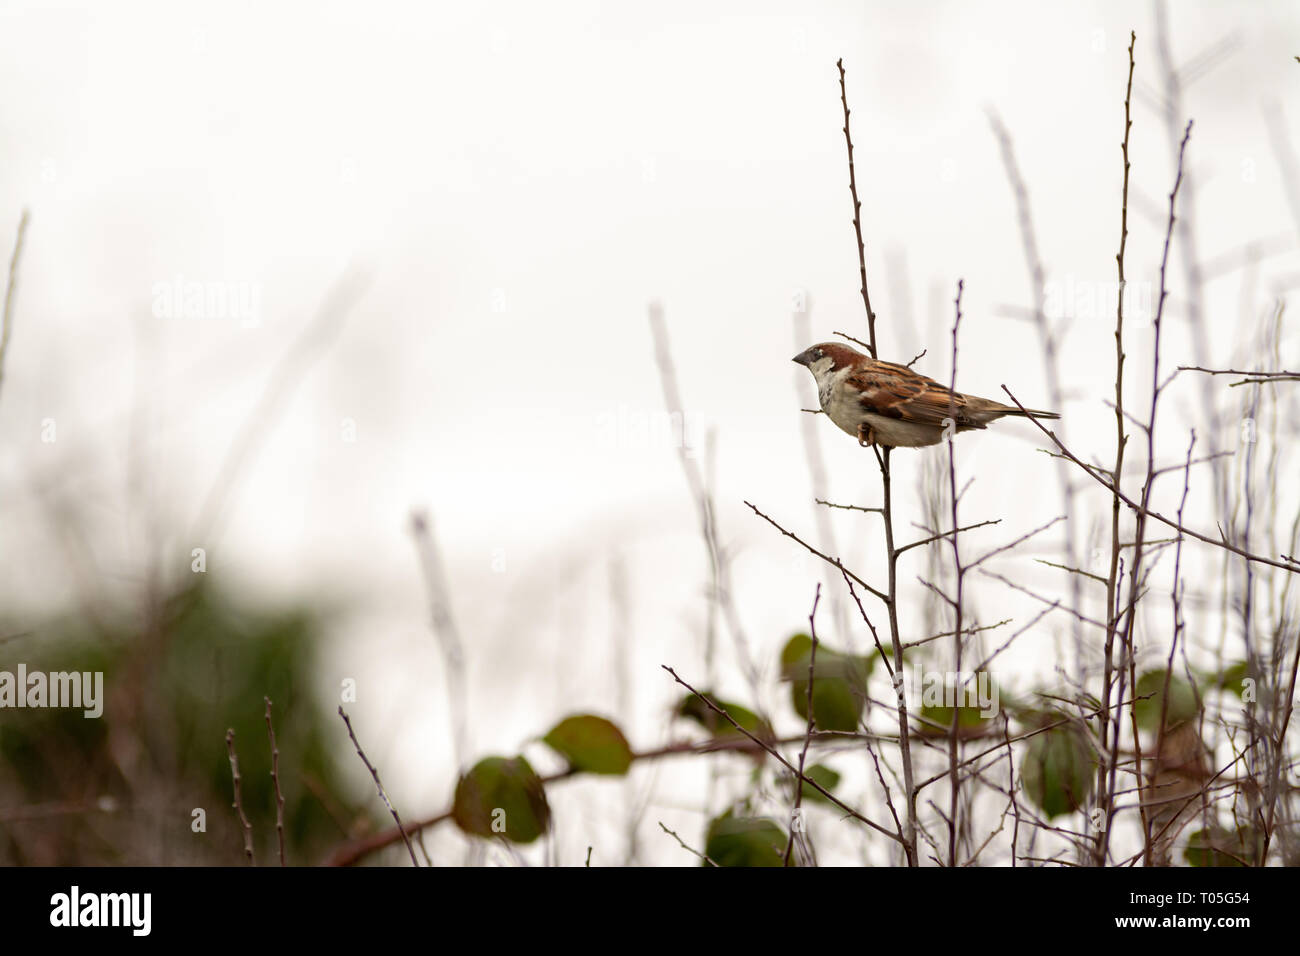 Sparrow on Twig in Winter. A common garden bird seen here in winter, perched on tree branch. Stock Photo